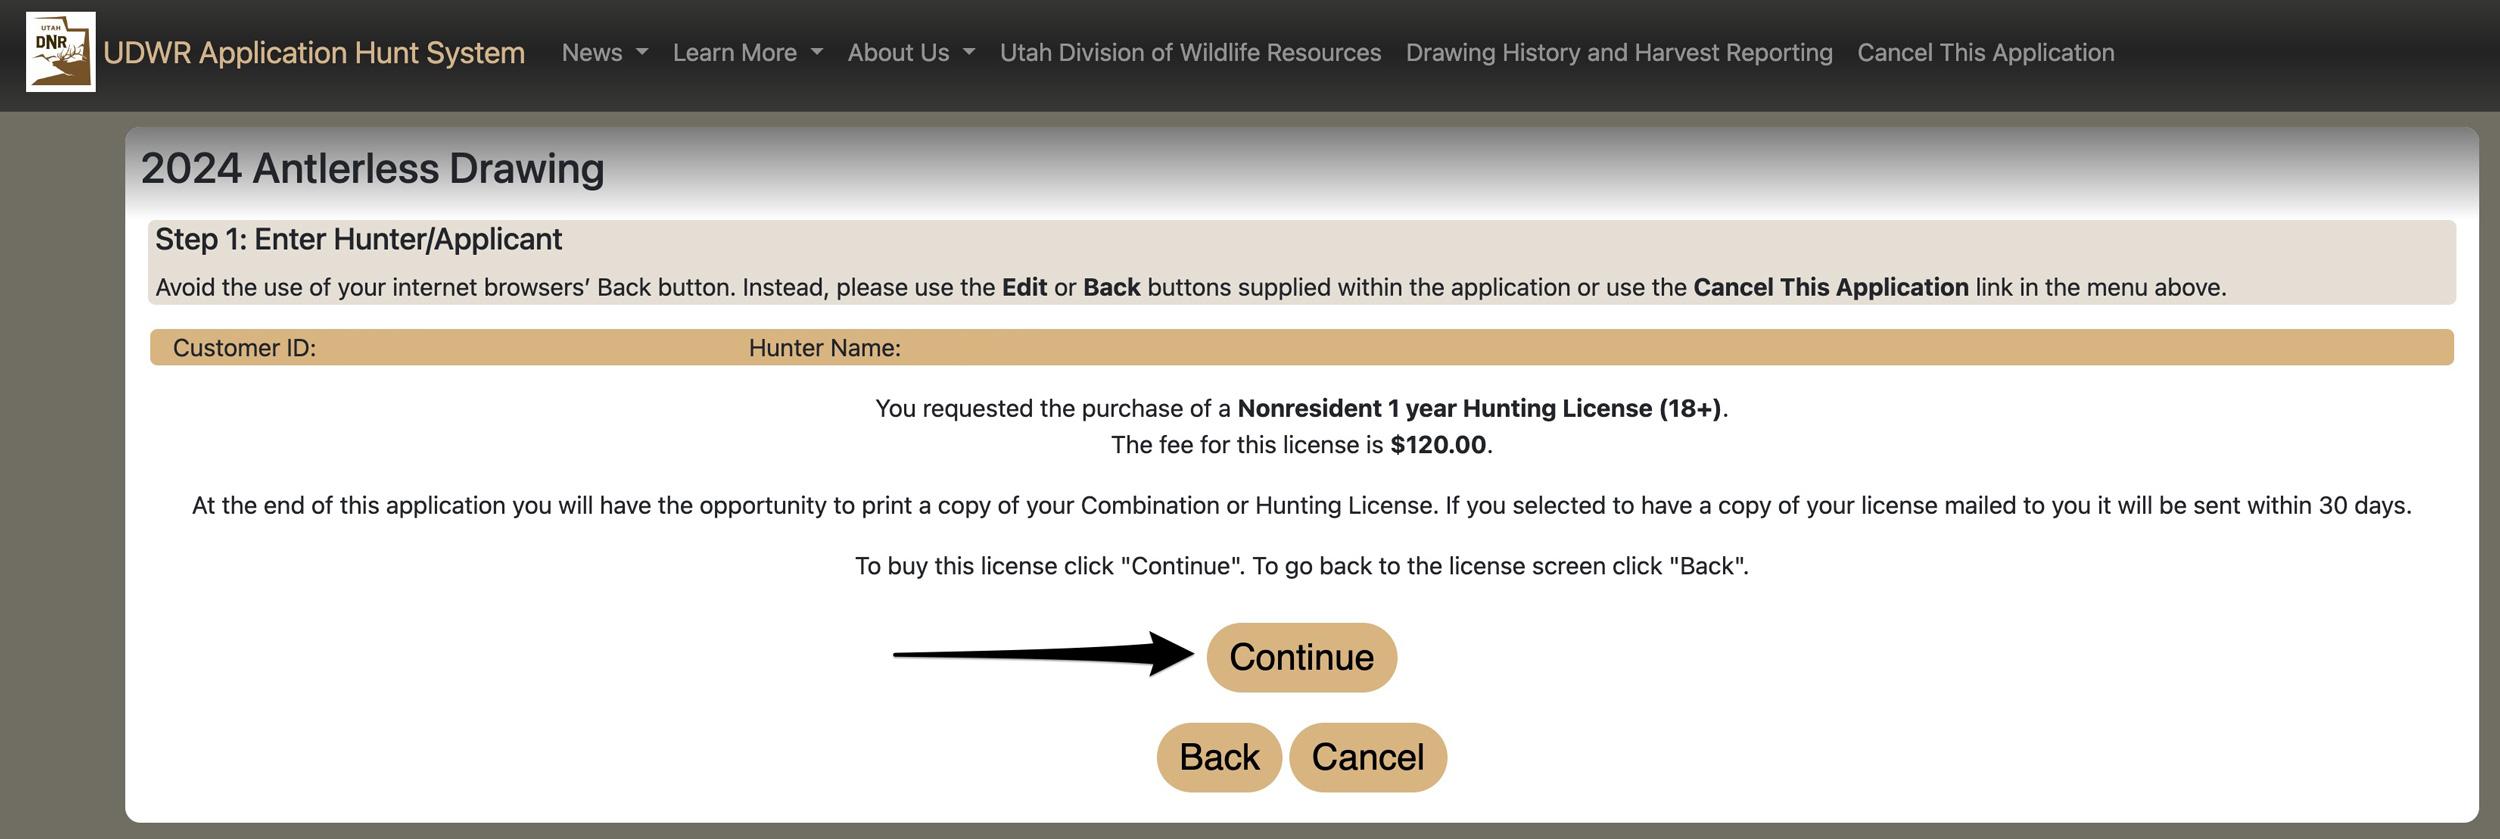 Confirming hunting license purchase for Utah